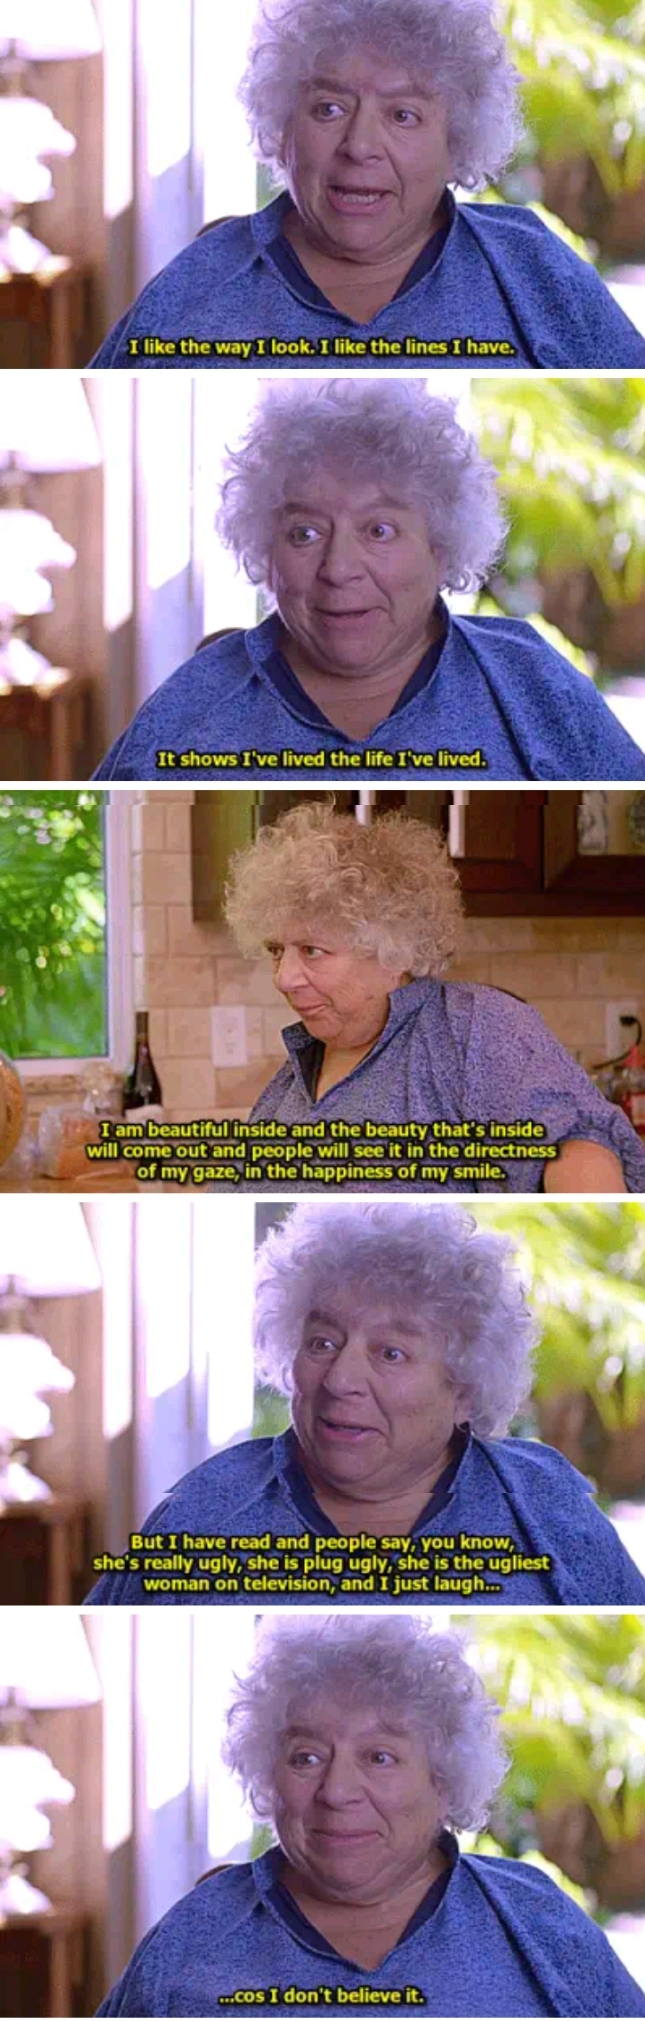 Miriam Margolyes doesn't believe your garbage.